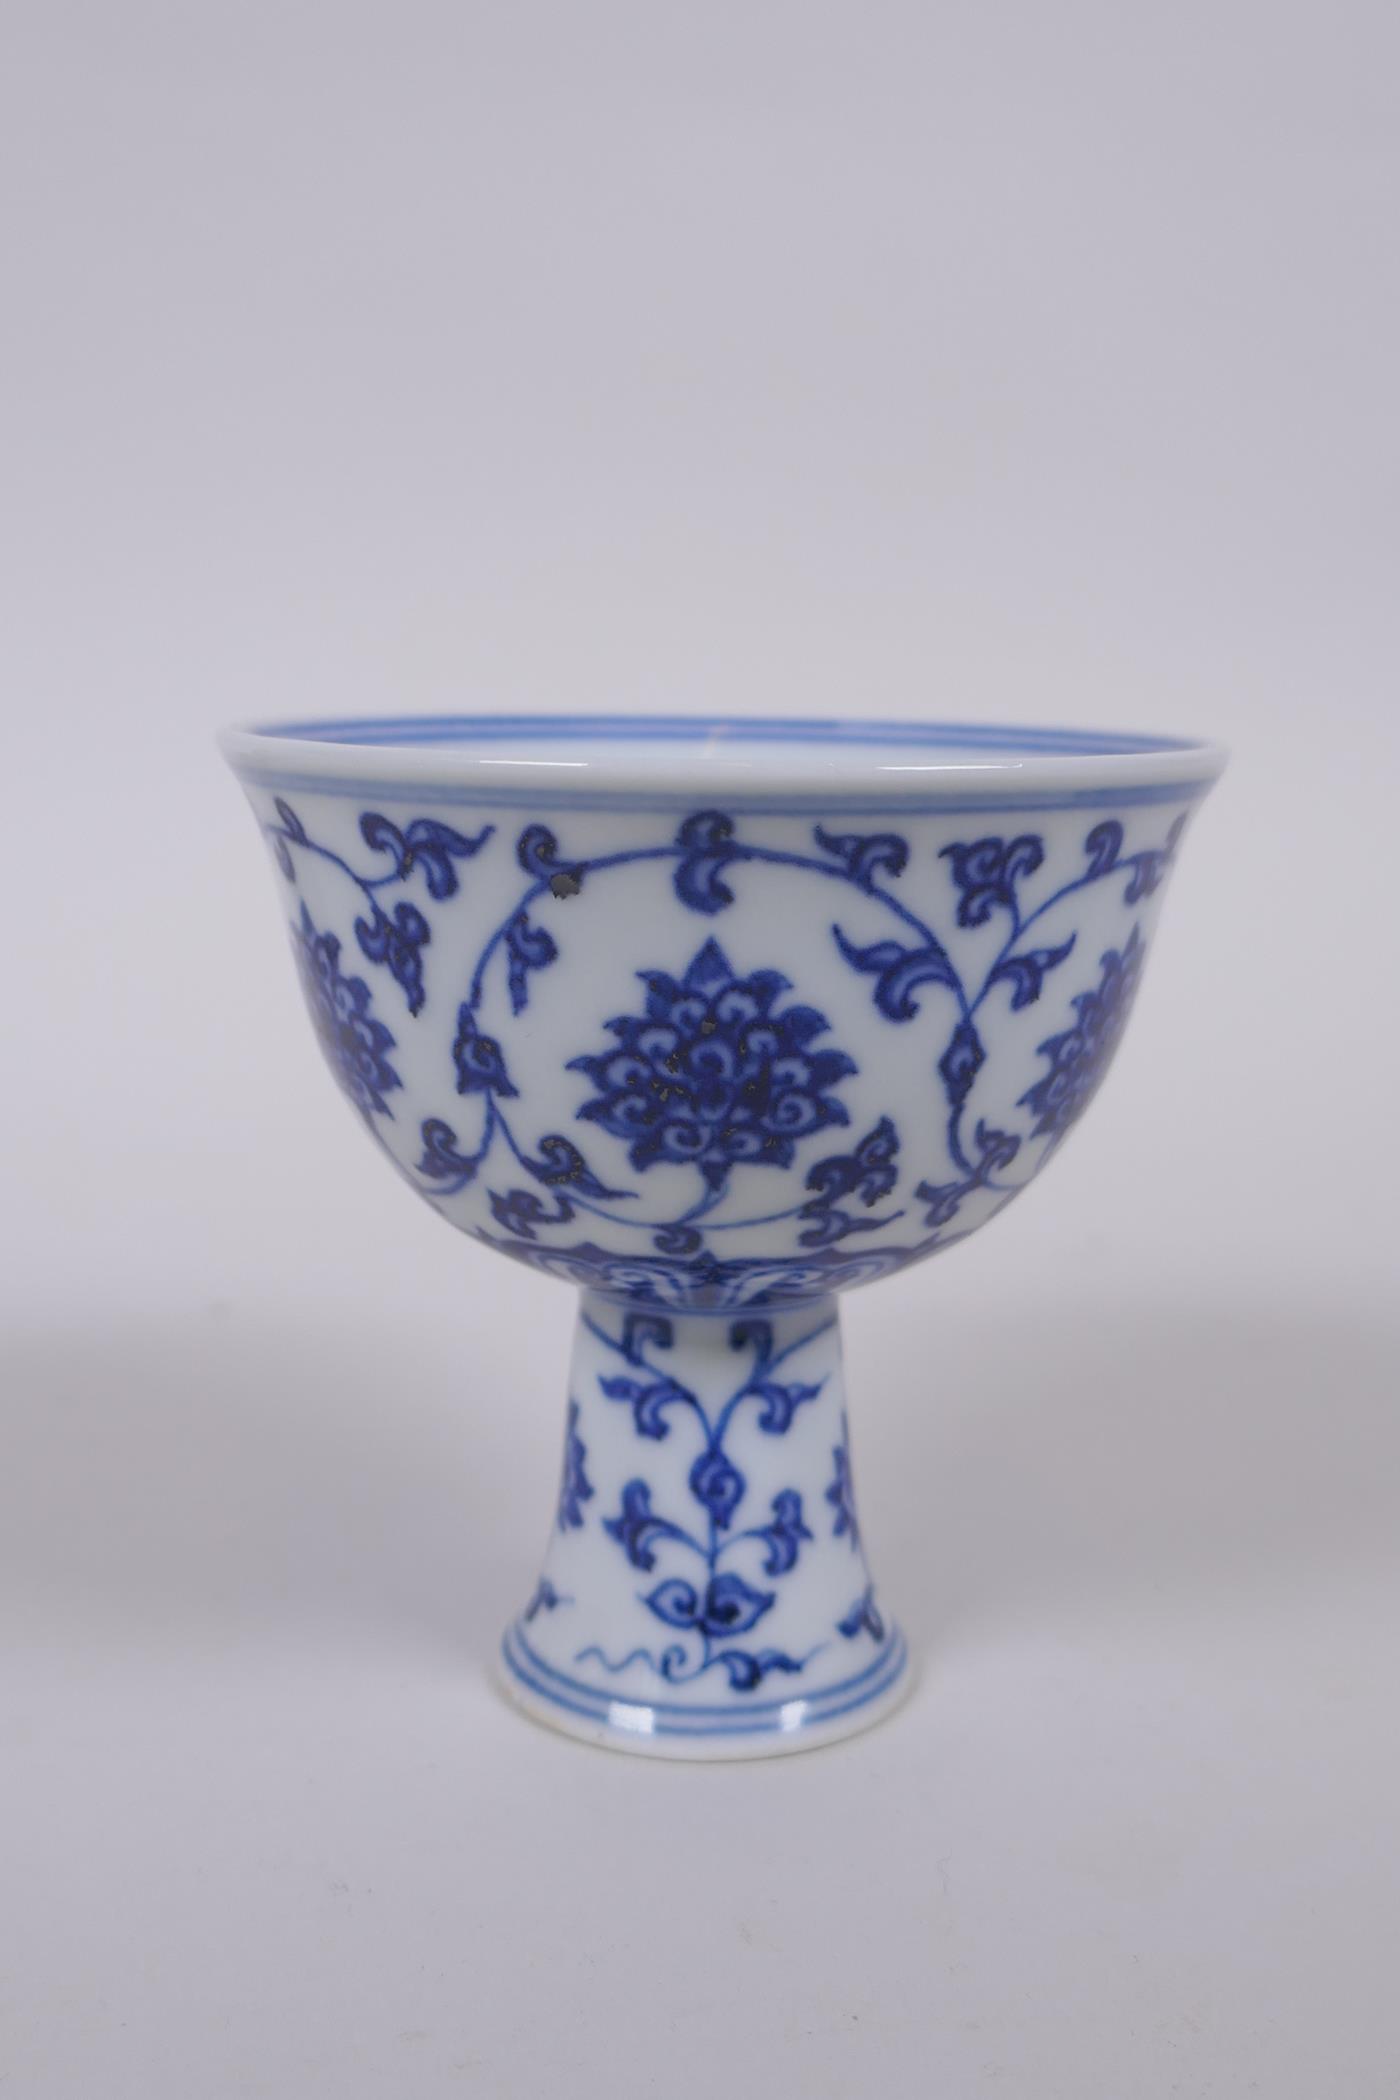 A blue and white porcelain stem cup with lotus flower decoration, Chinese Xuande 6 character mark to